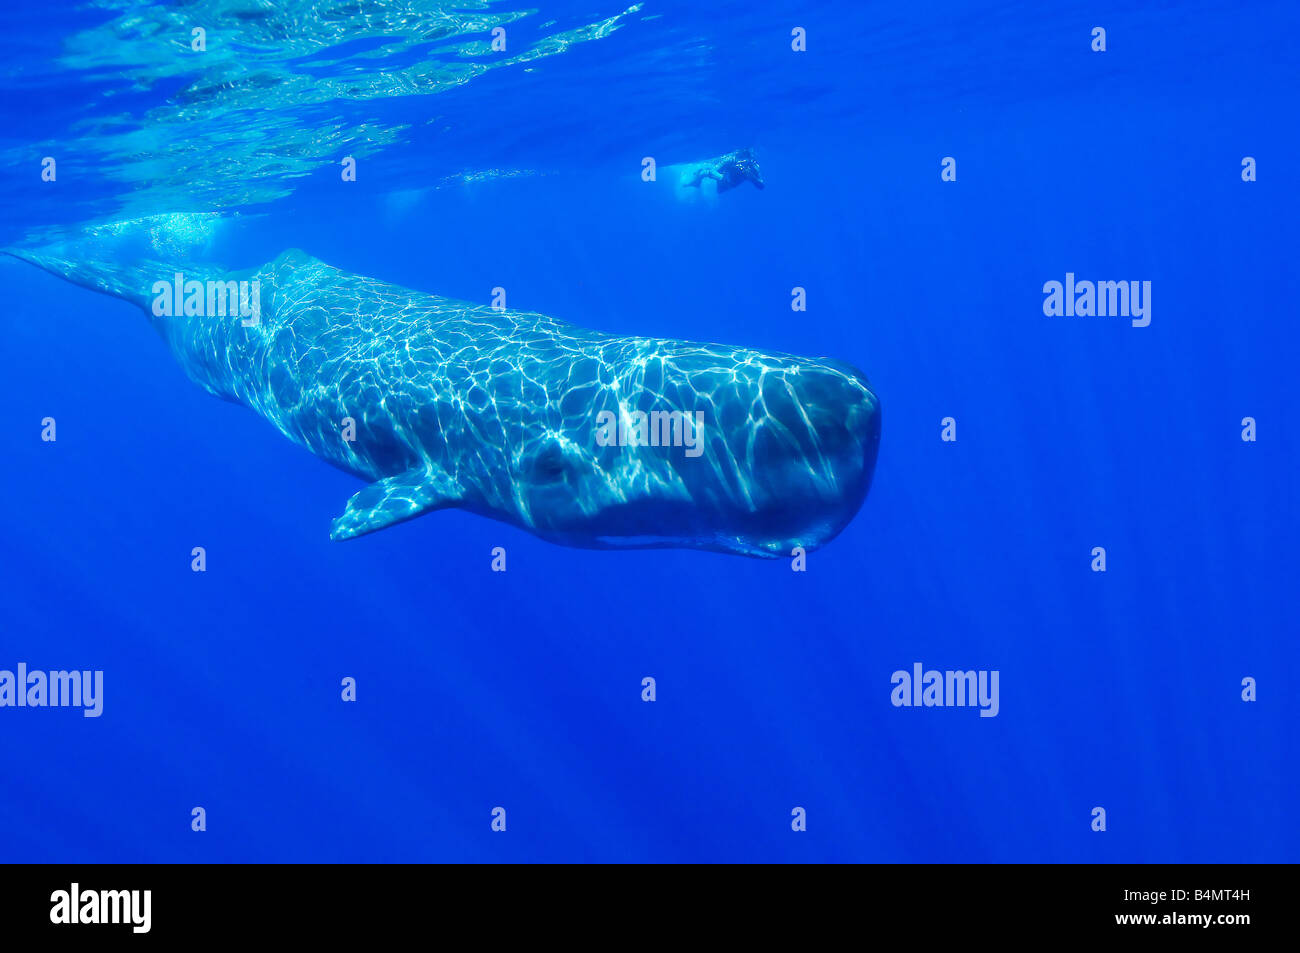 Physeter catodon, Physeter macrocephalus, sperm whale underwater with diver, Azores Stock Photo